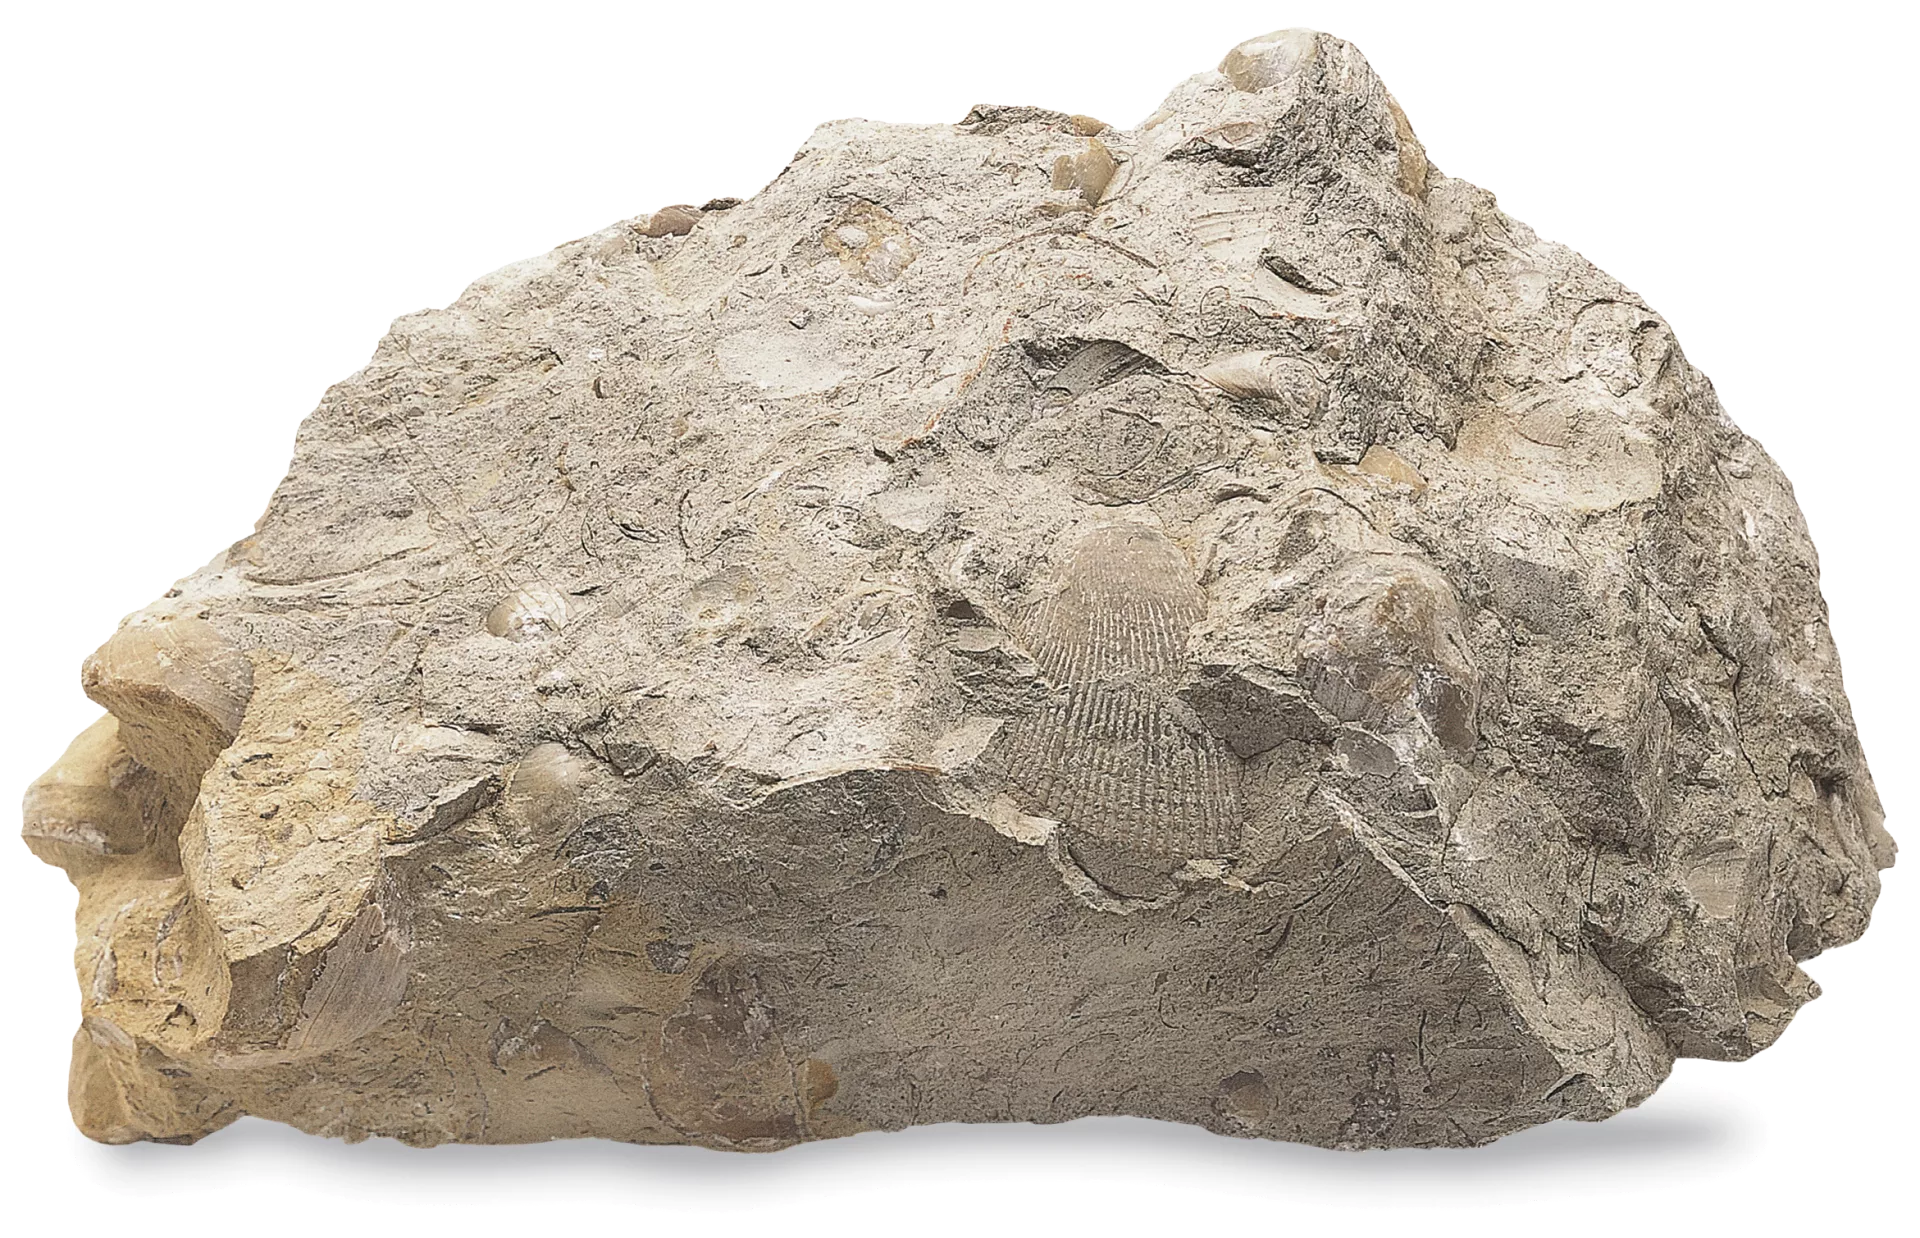 A fossil Rock